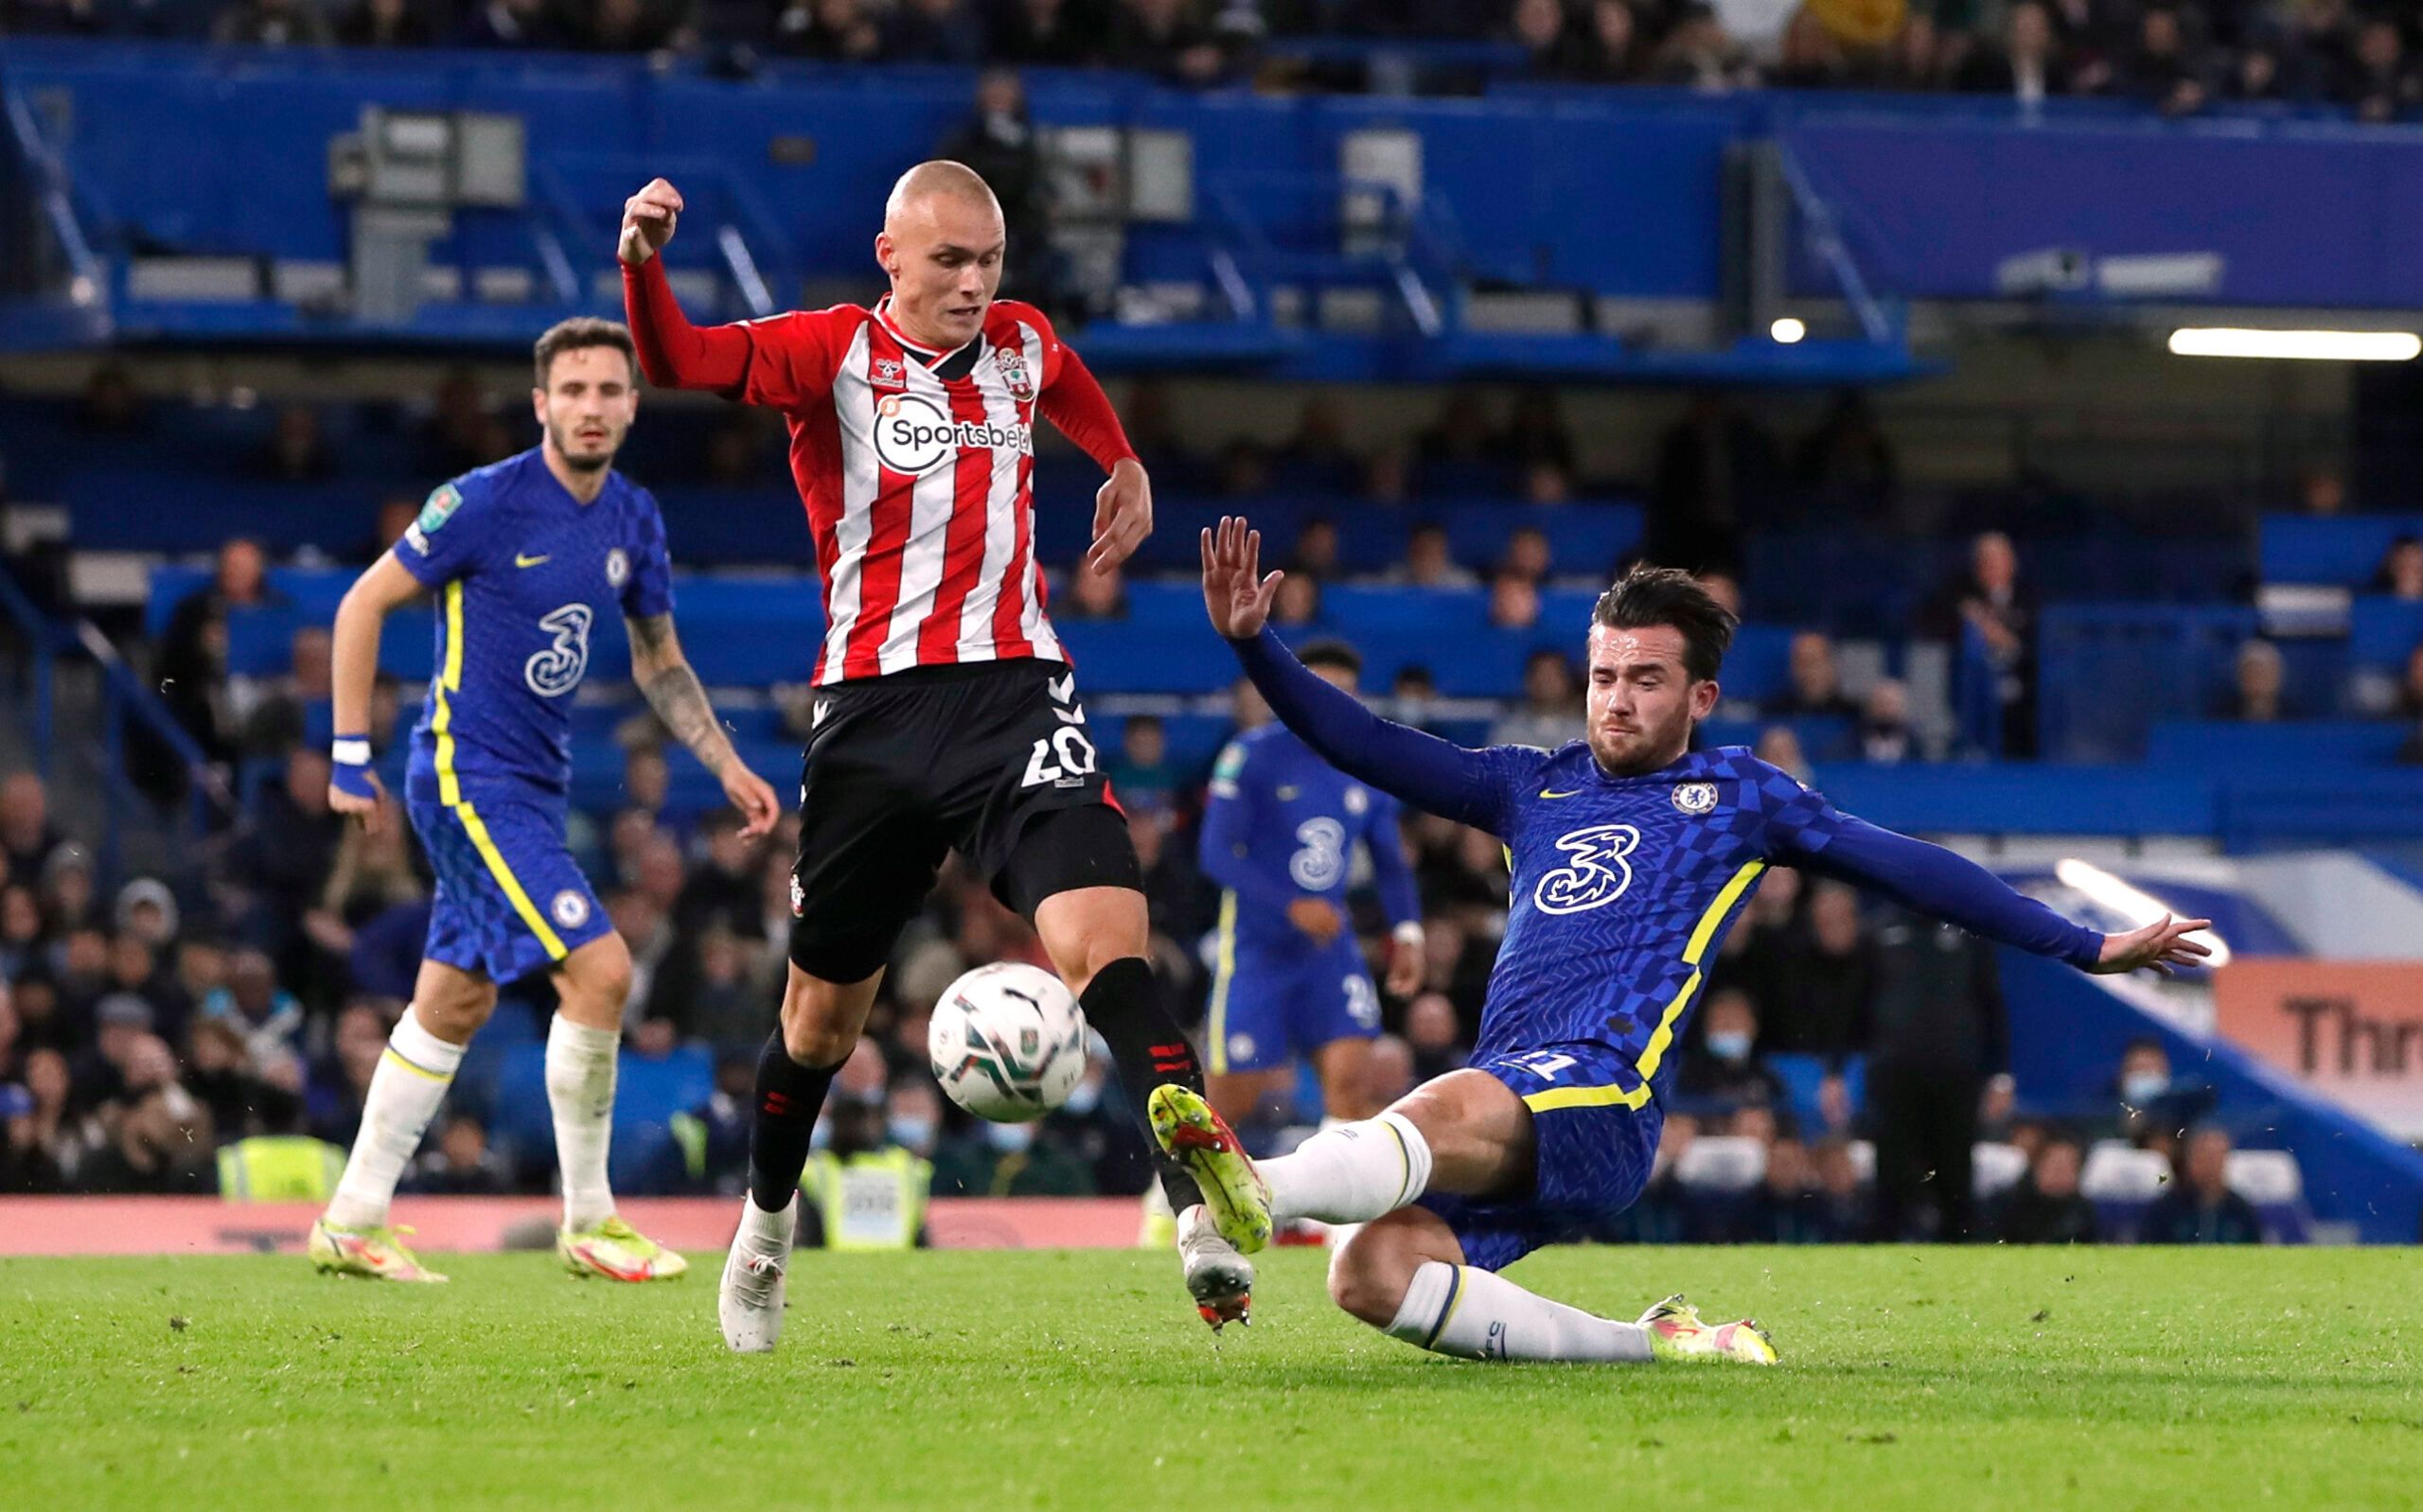 Soccer Football - Carabao Cup - Round of 16 - Chelsea v Southampton - Stamford Bridge, London, Britain - October 26, 2021 Southampton's Will Smallbone in action with Chelsea's Ben Chilwell Action Images via Reuters/Paul Childs EDITORIAL USE ONLY. No use with unauthorized audio, video, data, fixture lists, club/league logos or 'live' services. Online in-match use limited to 75 images, no video emulation. No use in betting, games or single club /league/player publications.  Please contact your acc